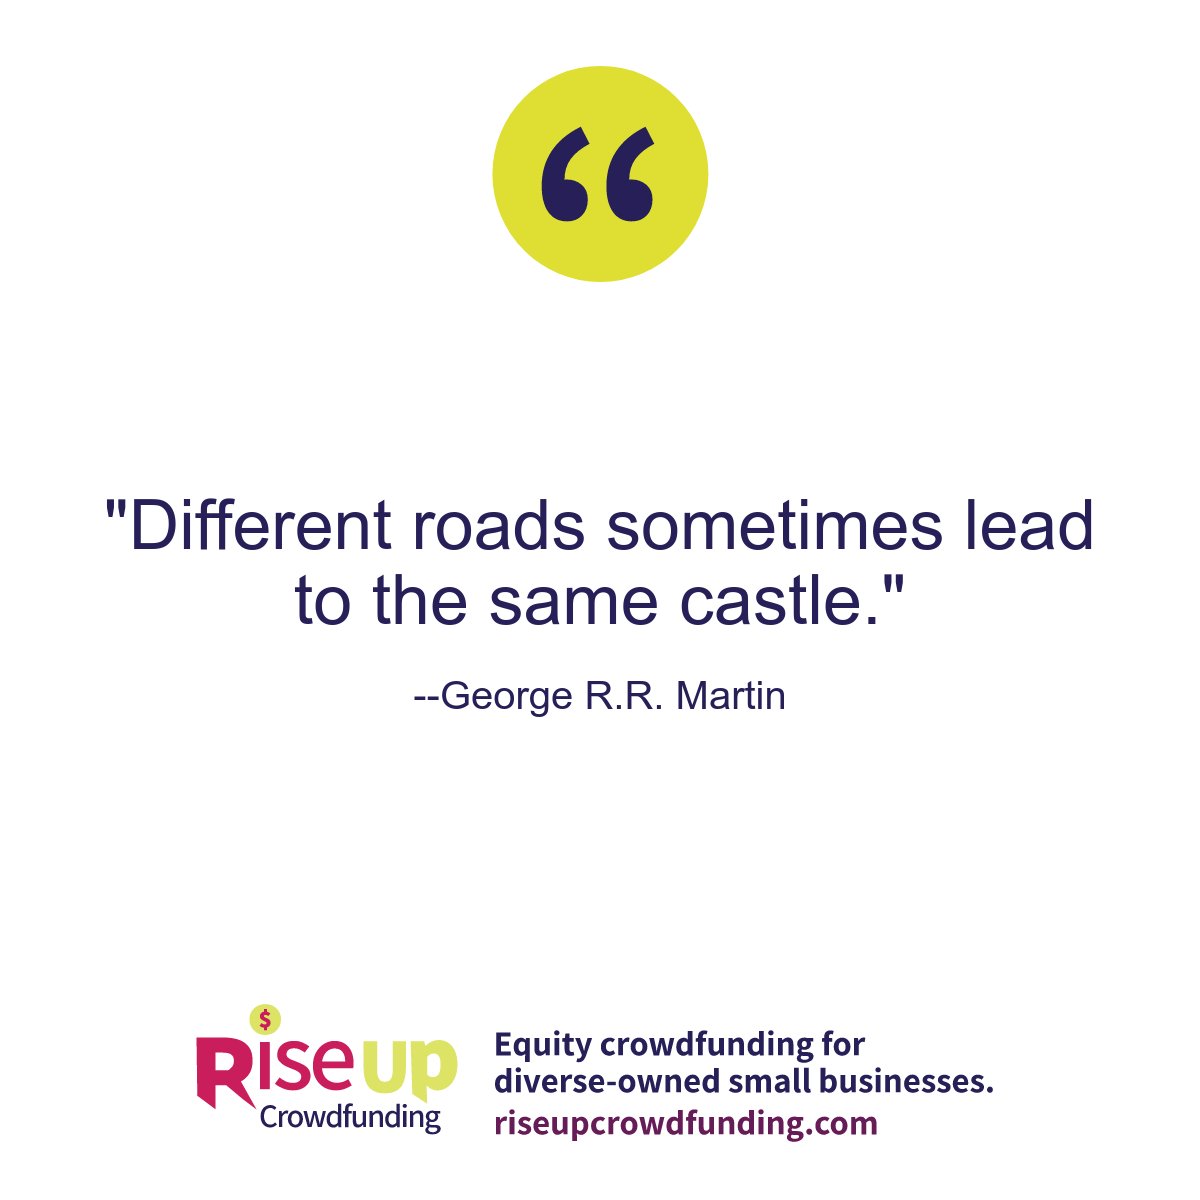 'Different roads sometimes lead to the same castle.' --George R.R. Martin riseupcrowdfunding.com #investing #equitycrowdfunding #riseupcrowdfunding #regulationcrowdfunding #Investindiversity #investinwomen #investinFoundersofcolor #crowdfundingcampaign